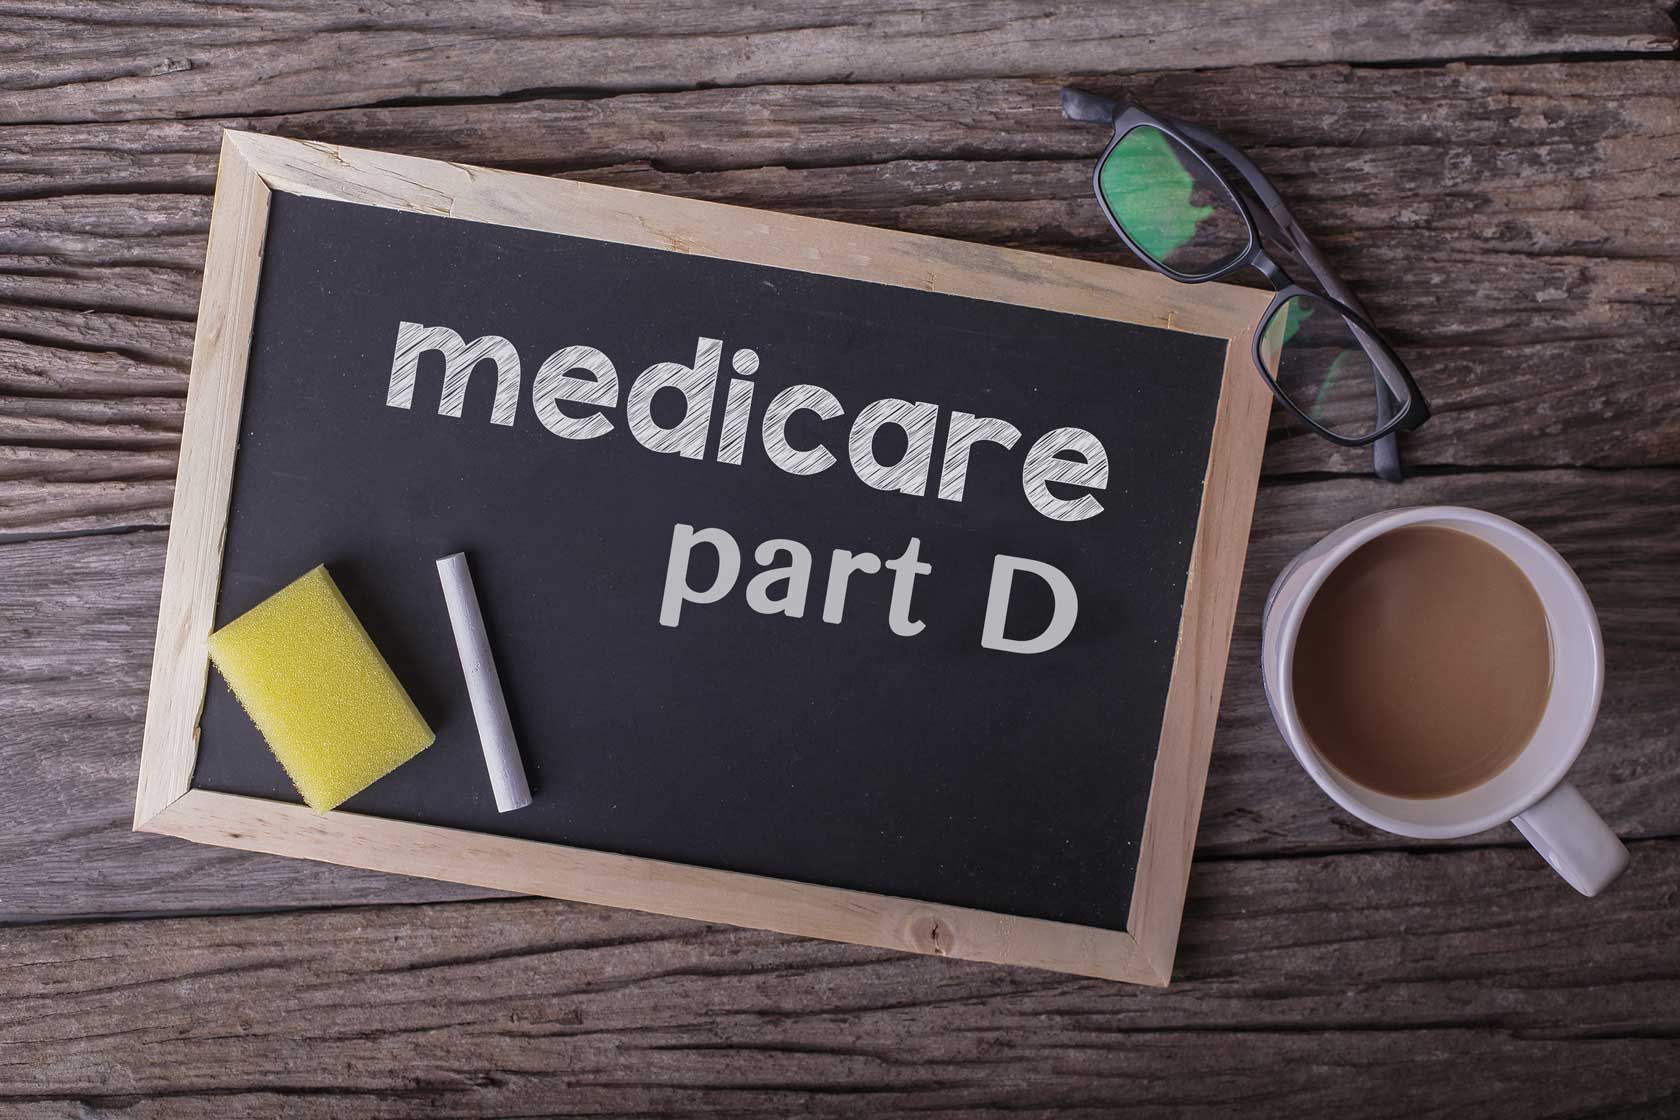 NCH Social Services Offers Assistance With Medicare Part D Enrollment